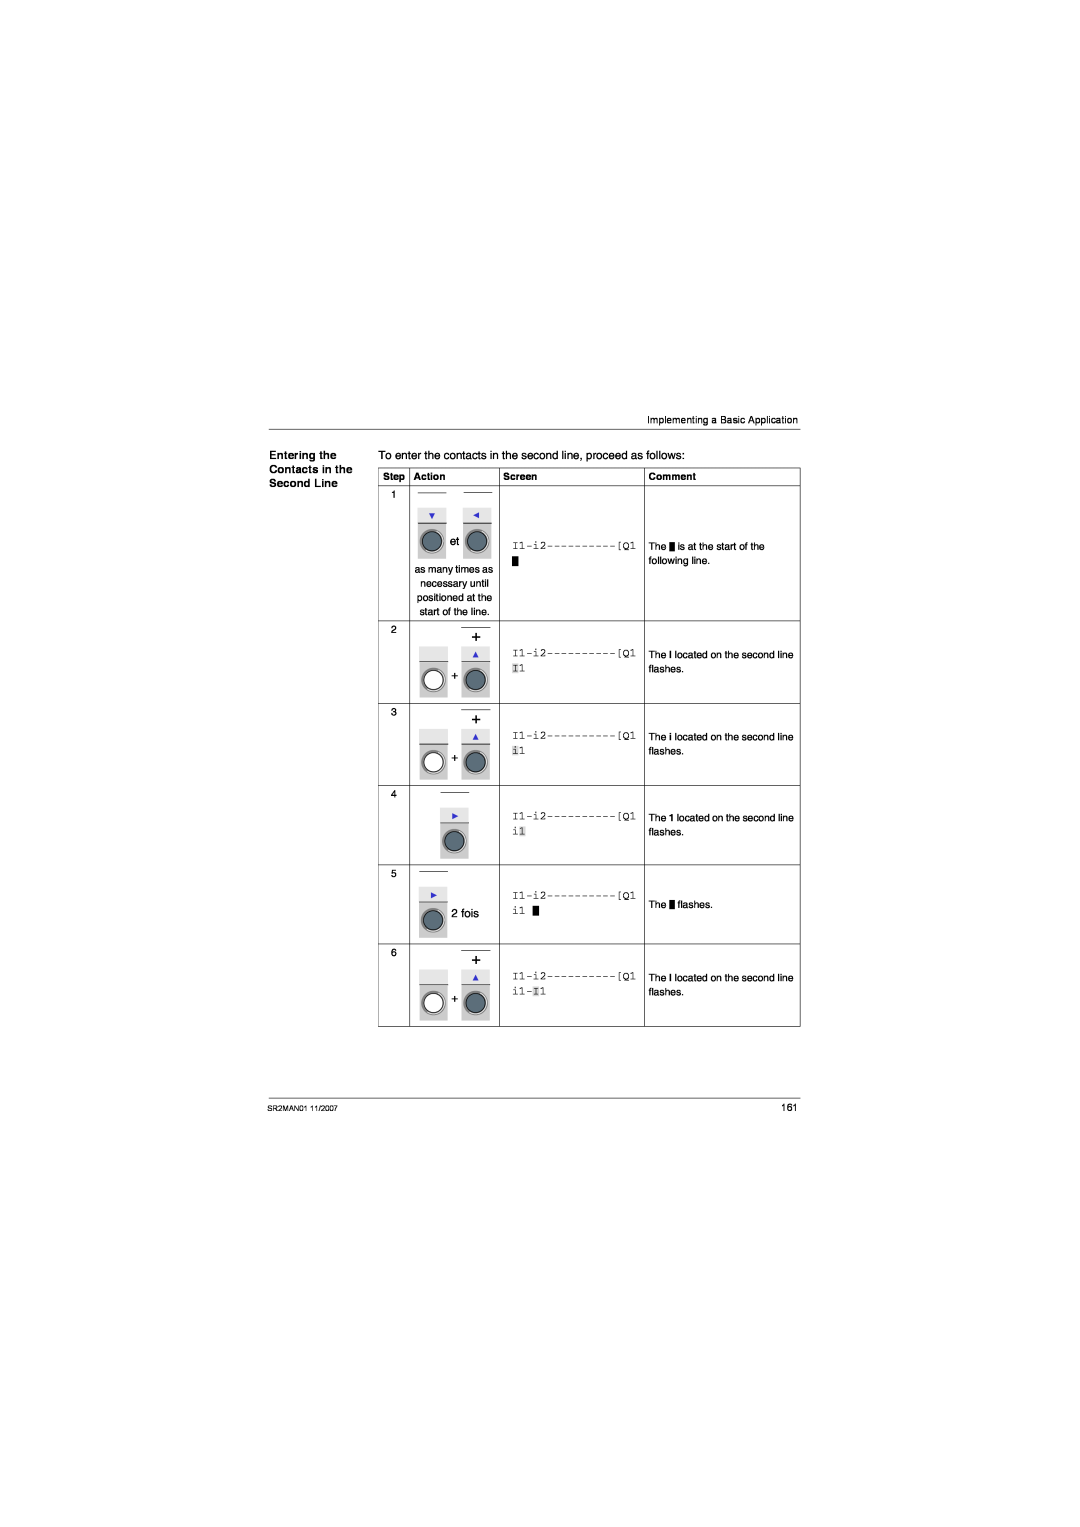 Schneider Electric SR2MAN01 Entering the Contacts in the Second Line, Step Action, Screen, Comment, as many times as 